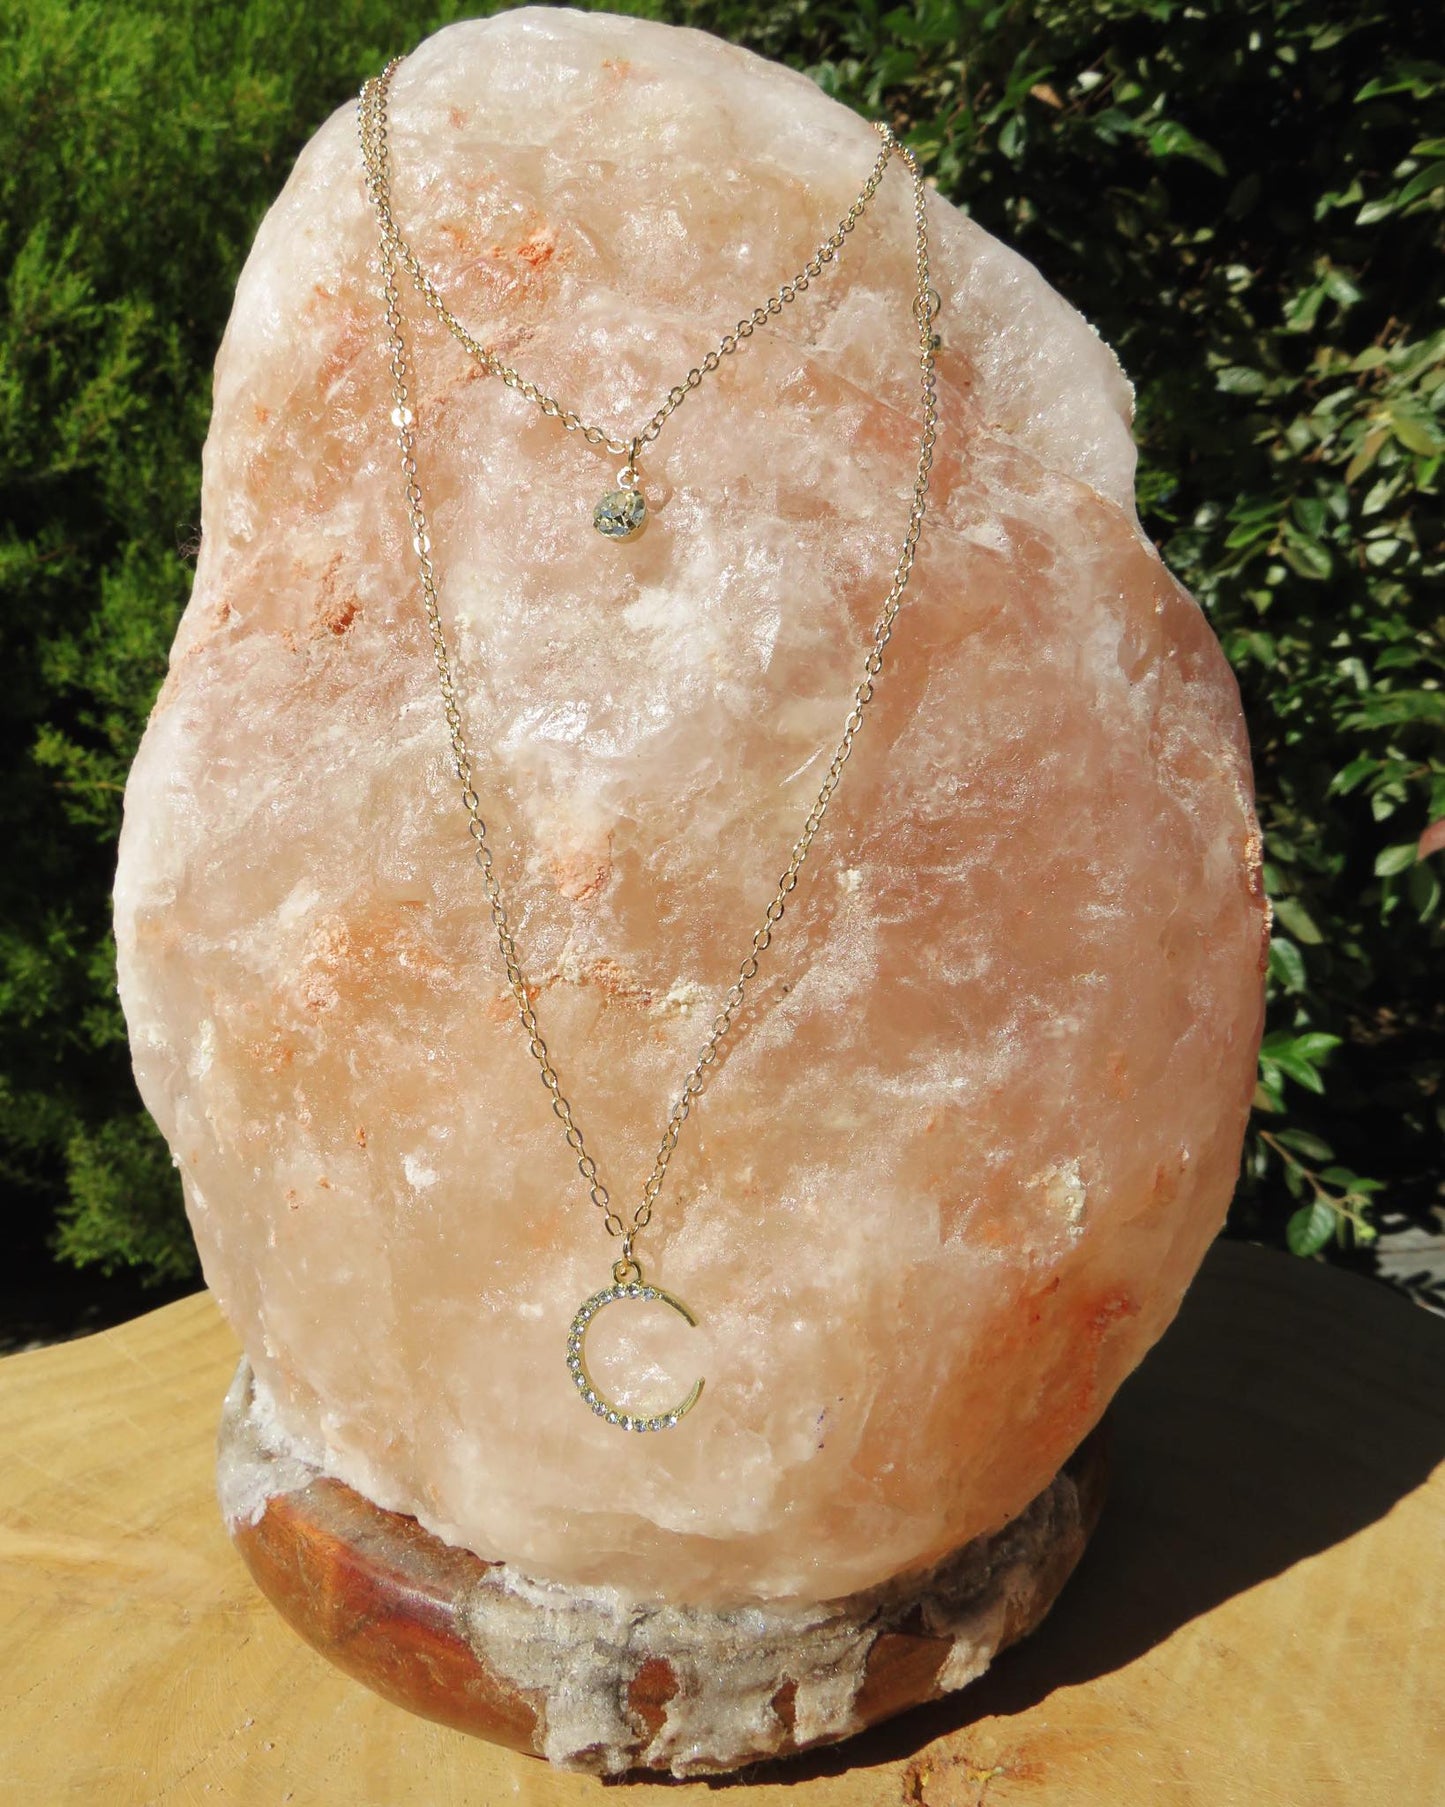 Double Layer Moon & Crystal Pendant Necklace